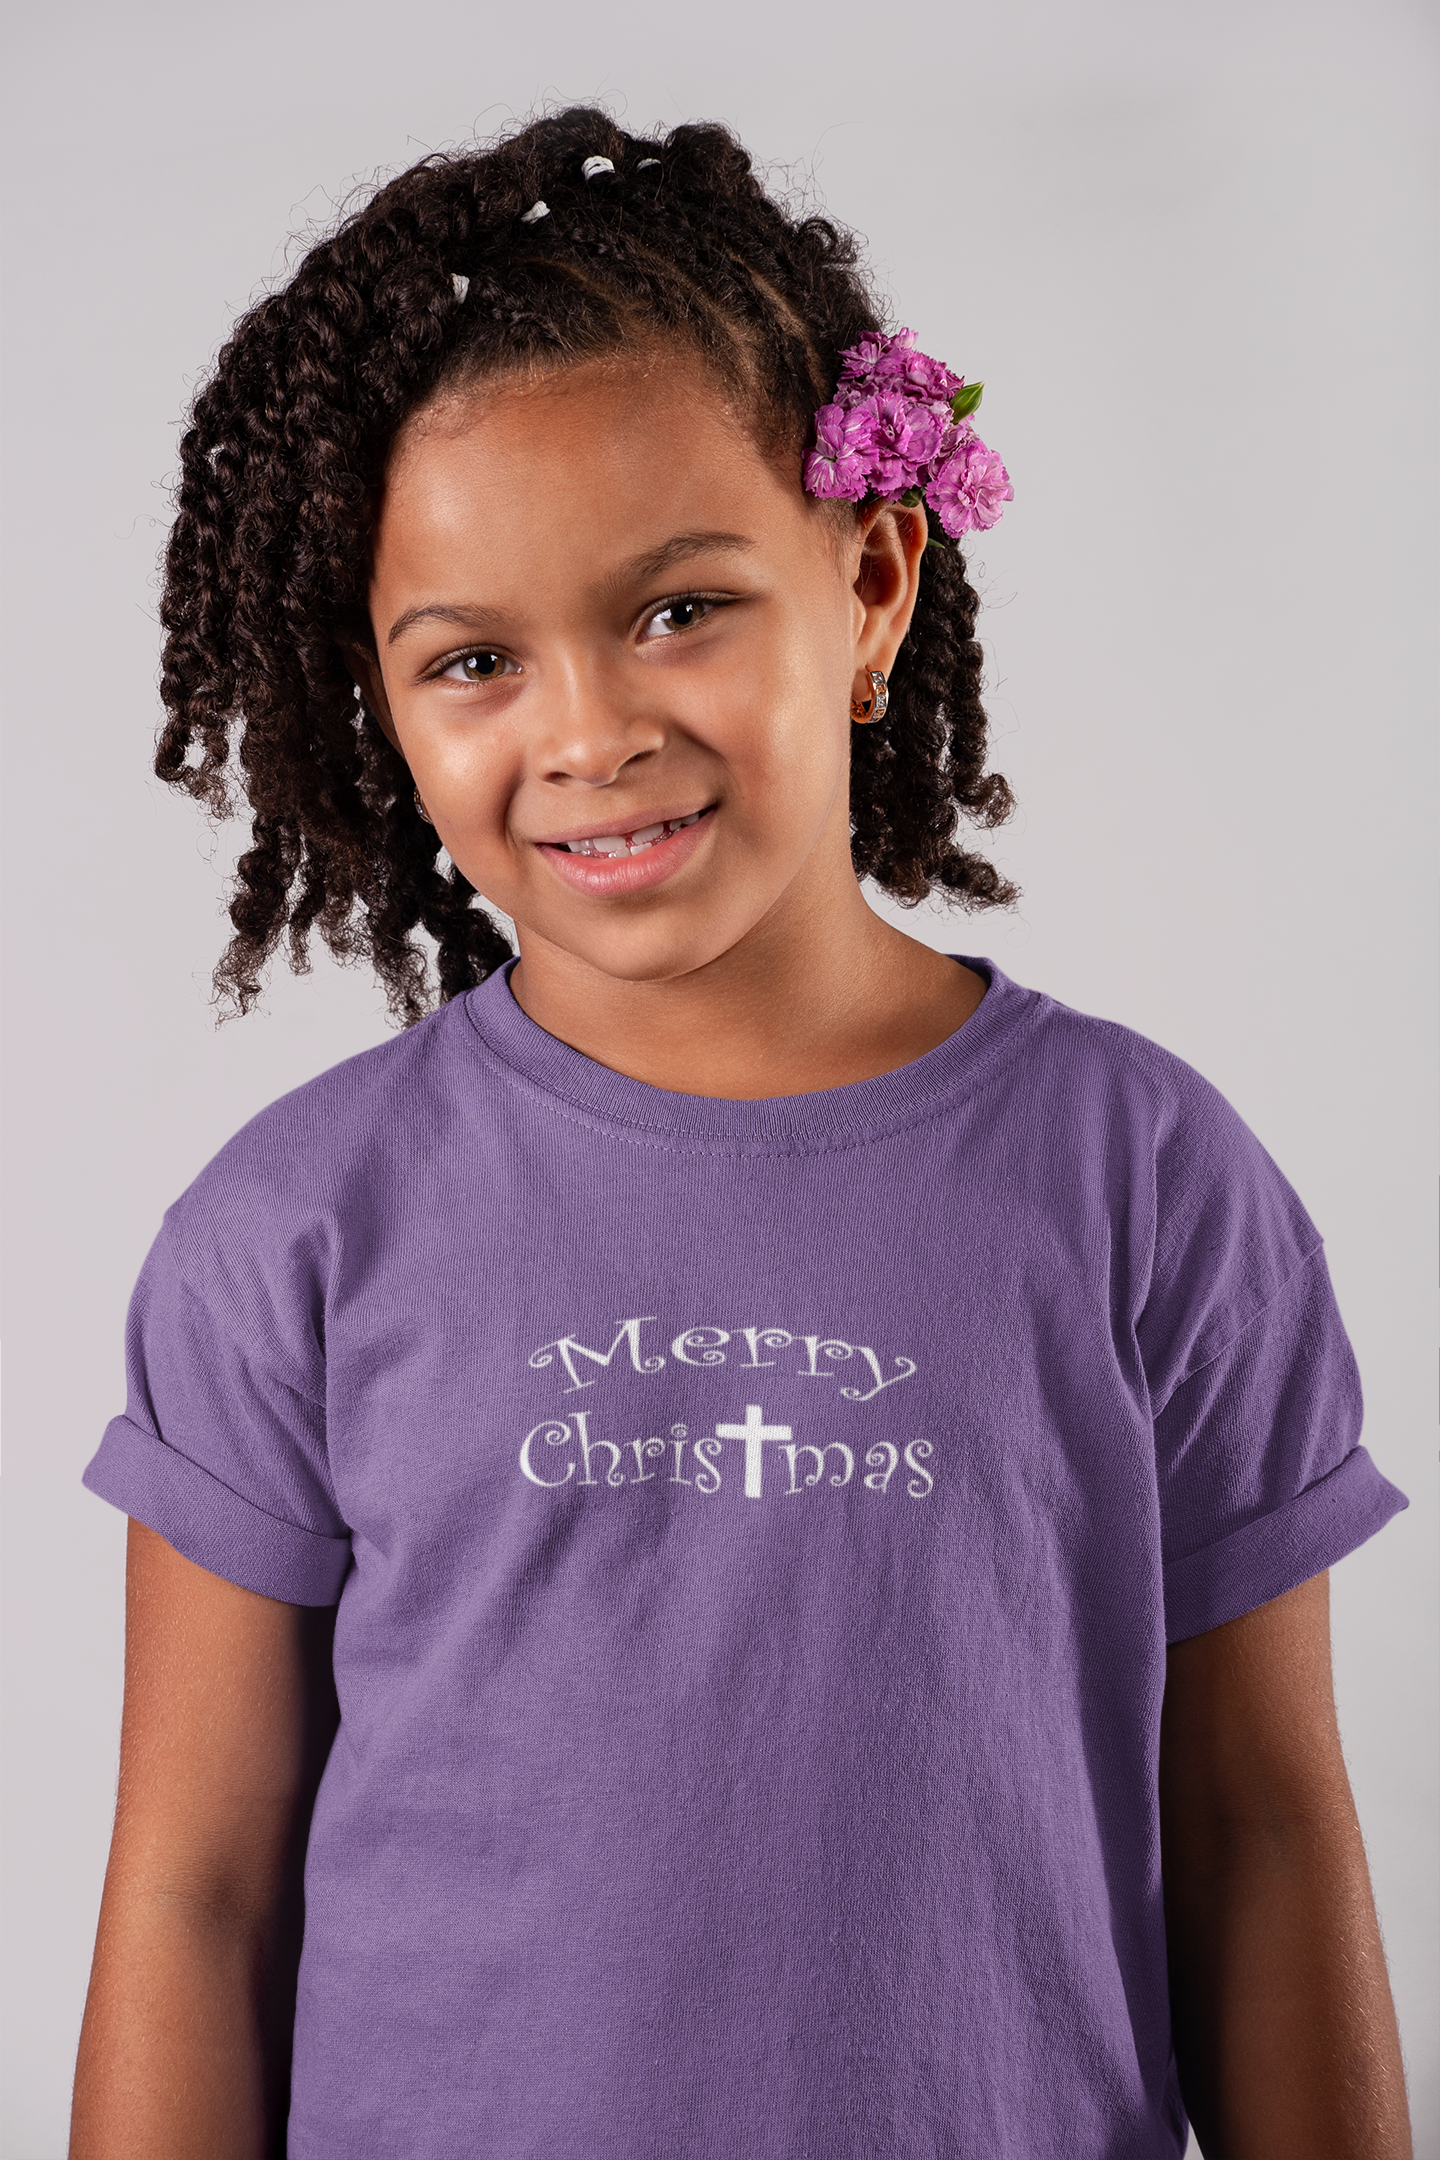 Girls Princess Tee "Merry Christmas" in 7 Colors and 5 Sizes (4339515490398)